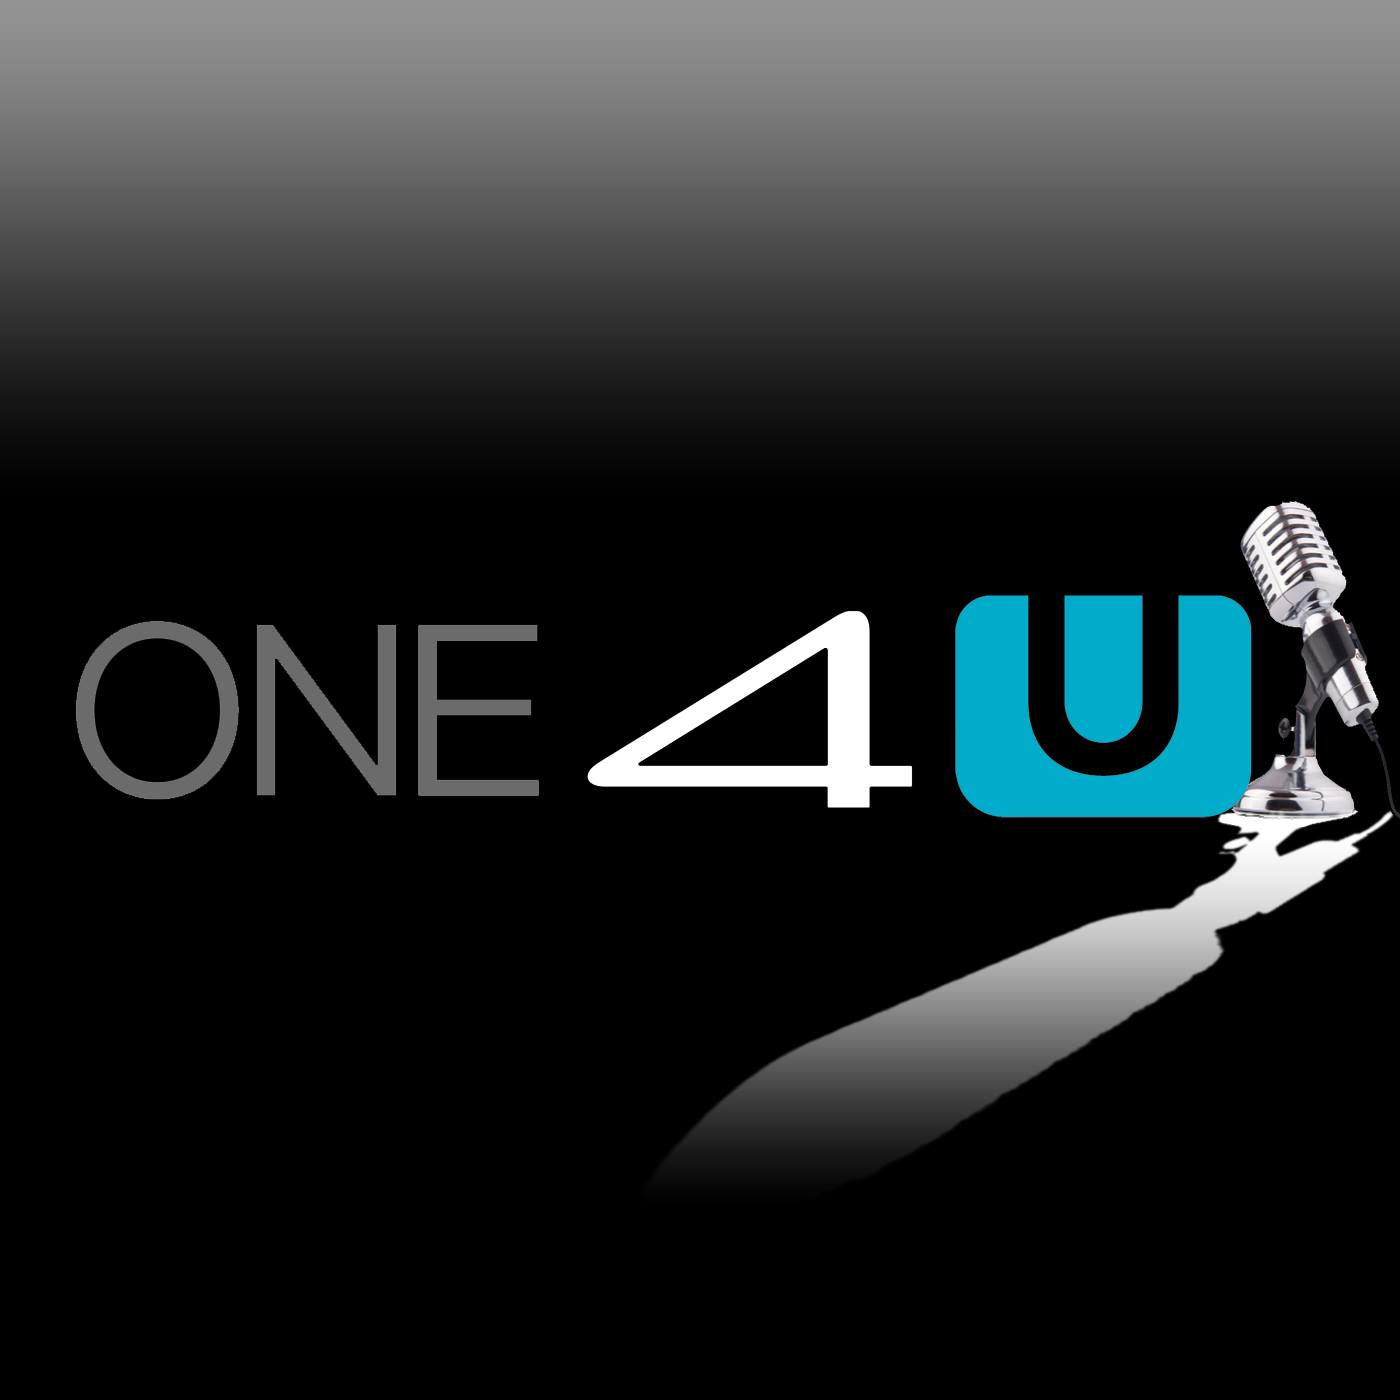 One4U Episode 2 "E3 Thoughts and excitement" Father's Day